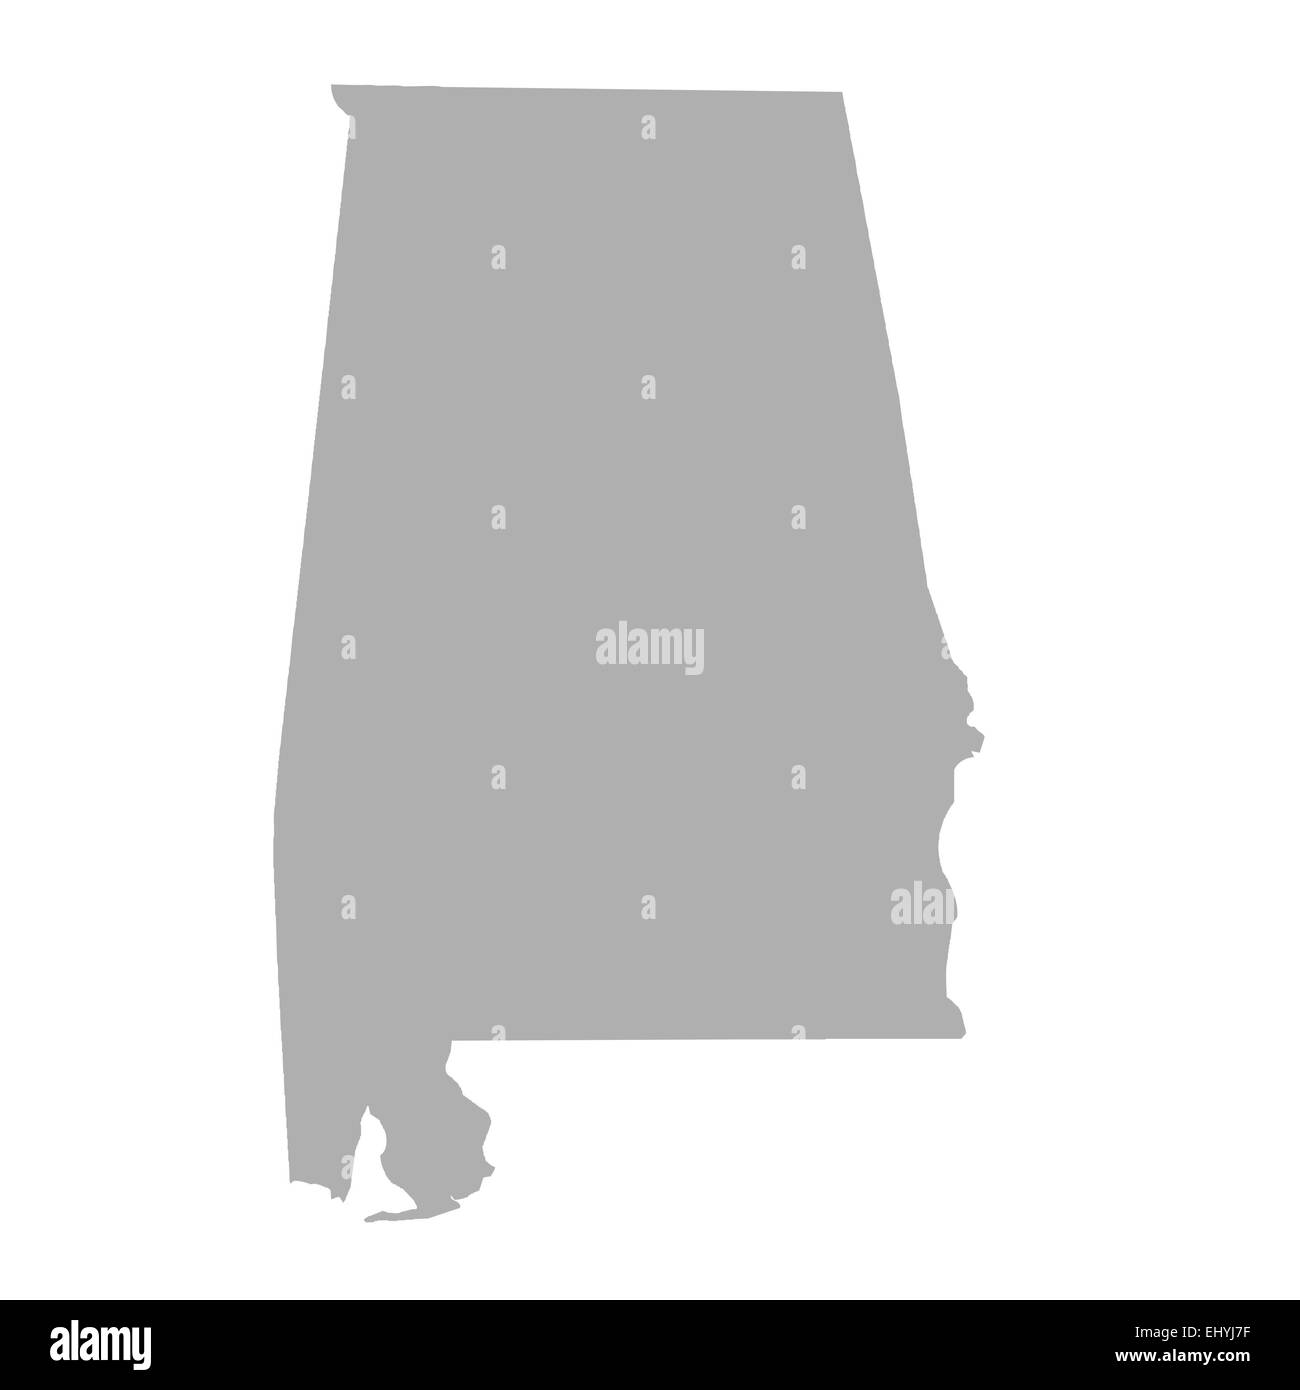 Alabama State map isolated on a white background, U.S.A. Stock Photo